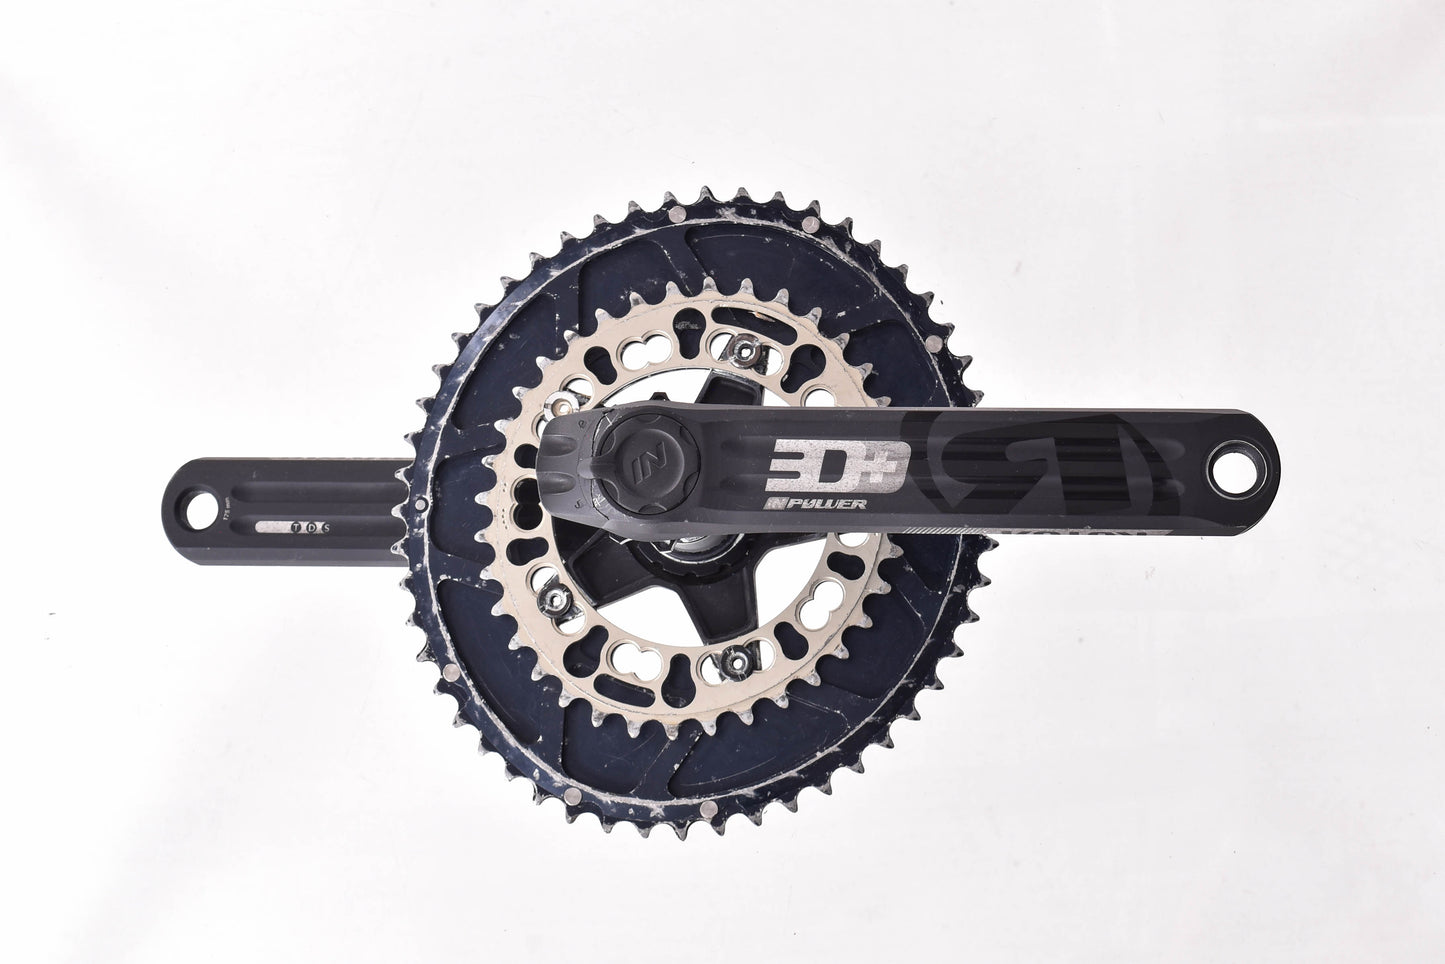 USED Rotor 3D+ 175mm Crankset 110mm BCD 52/36T 30mm spindle